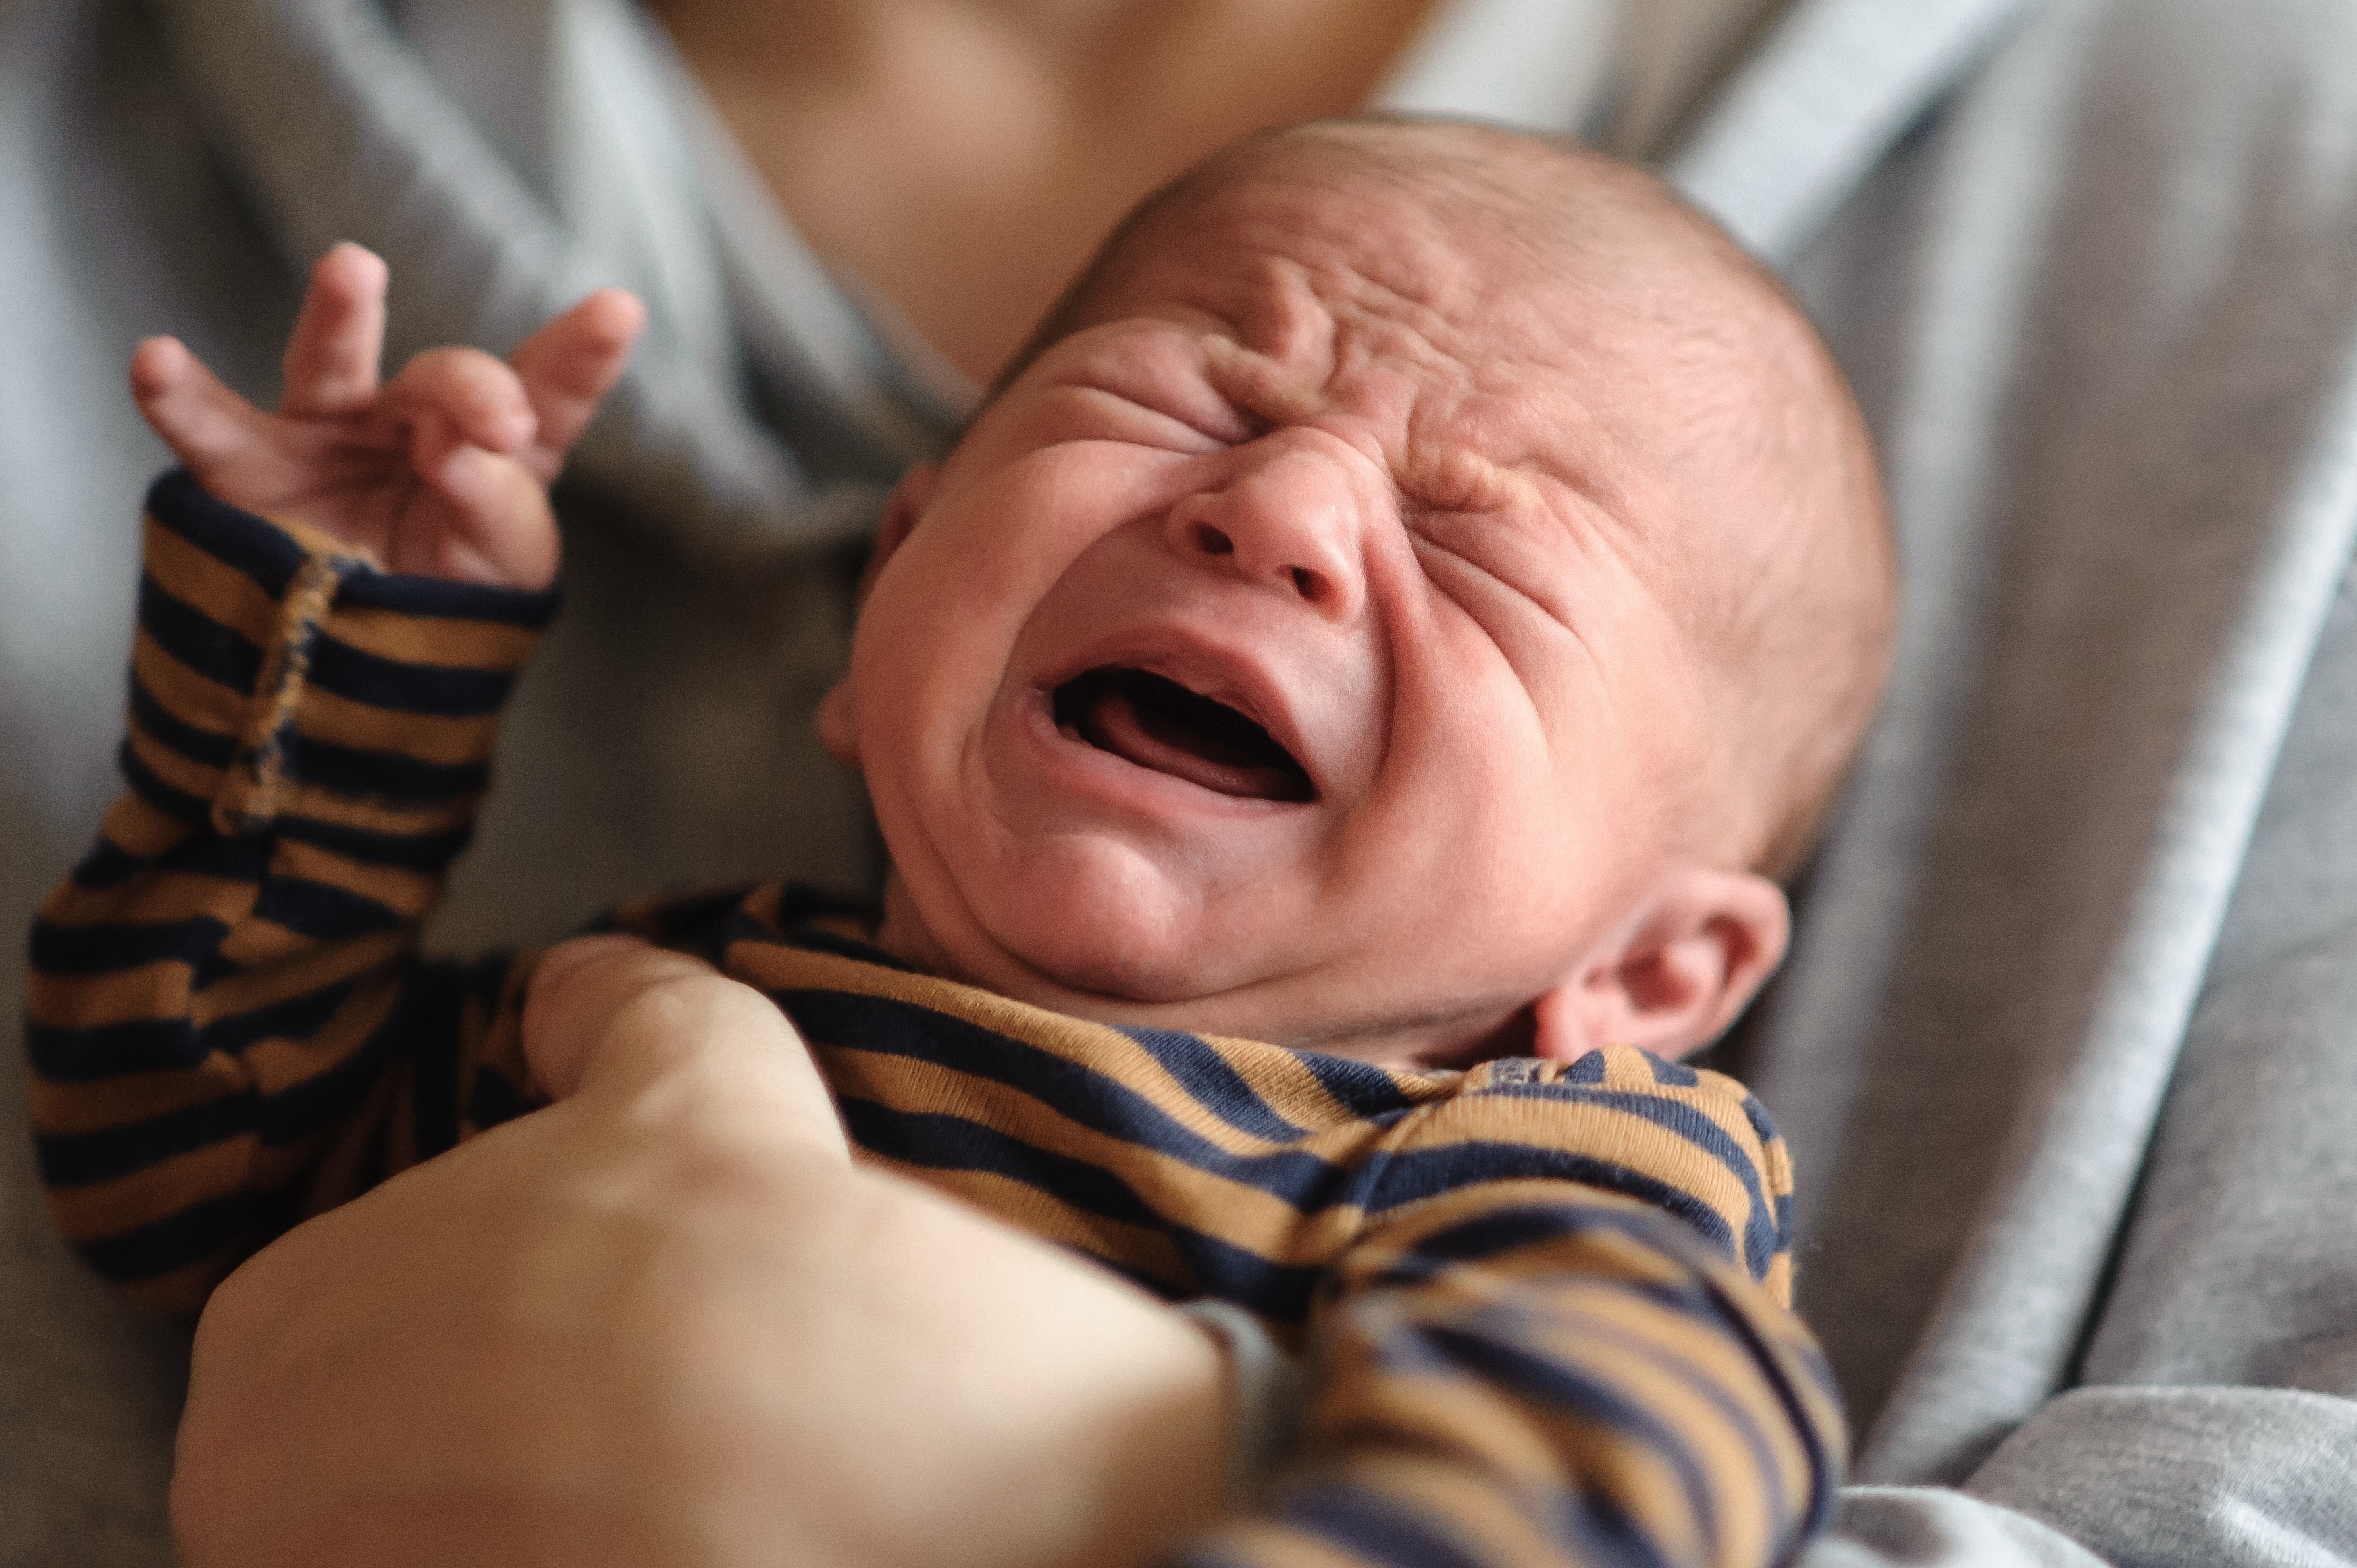 Crying infant being held